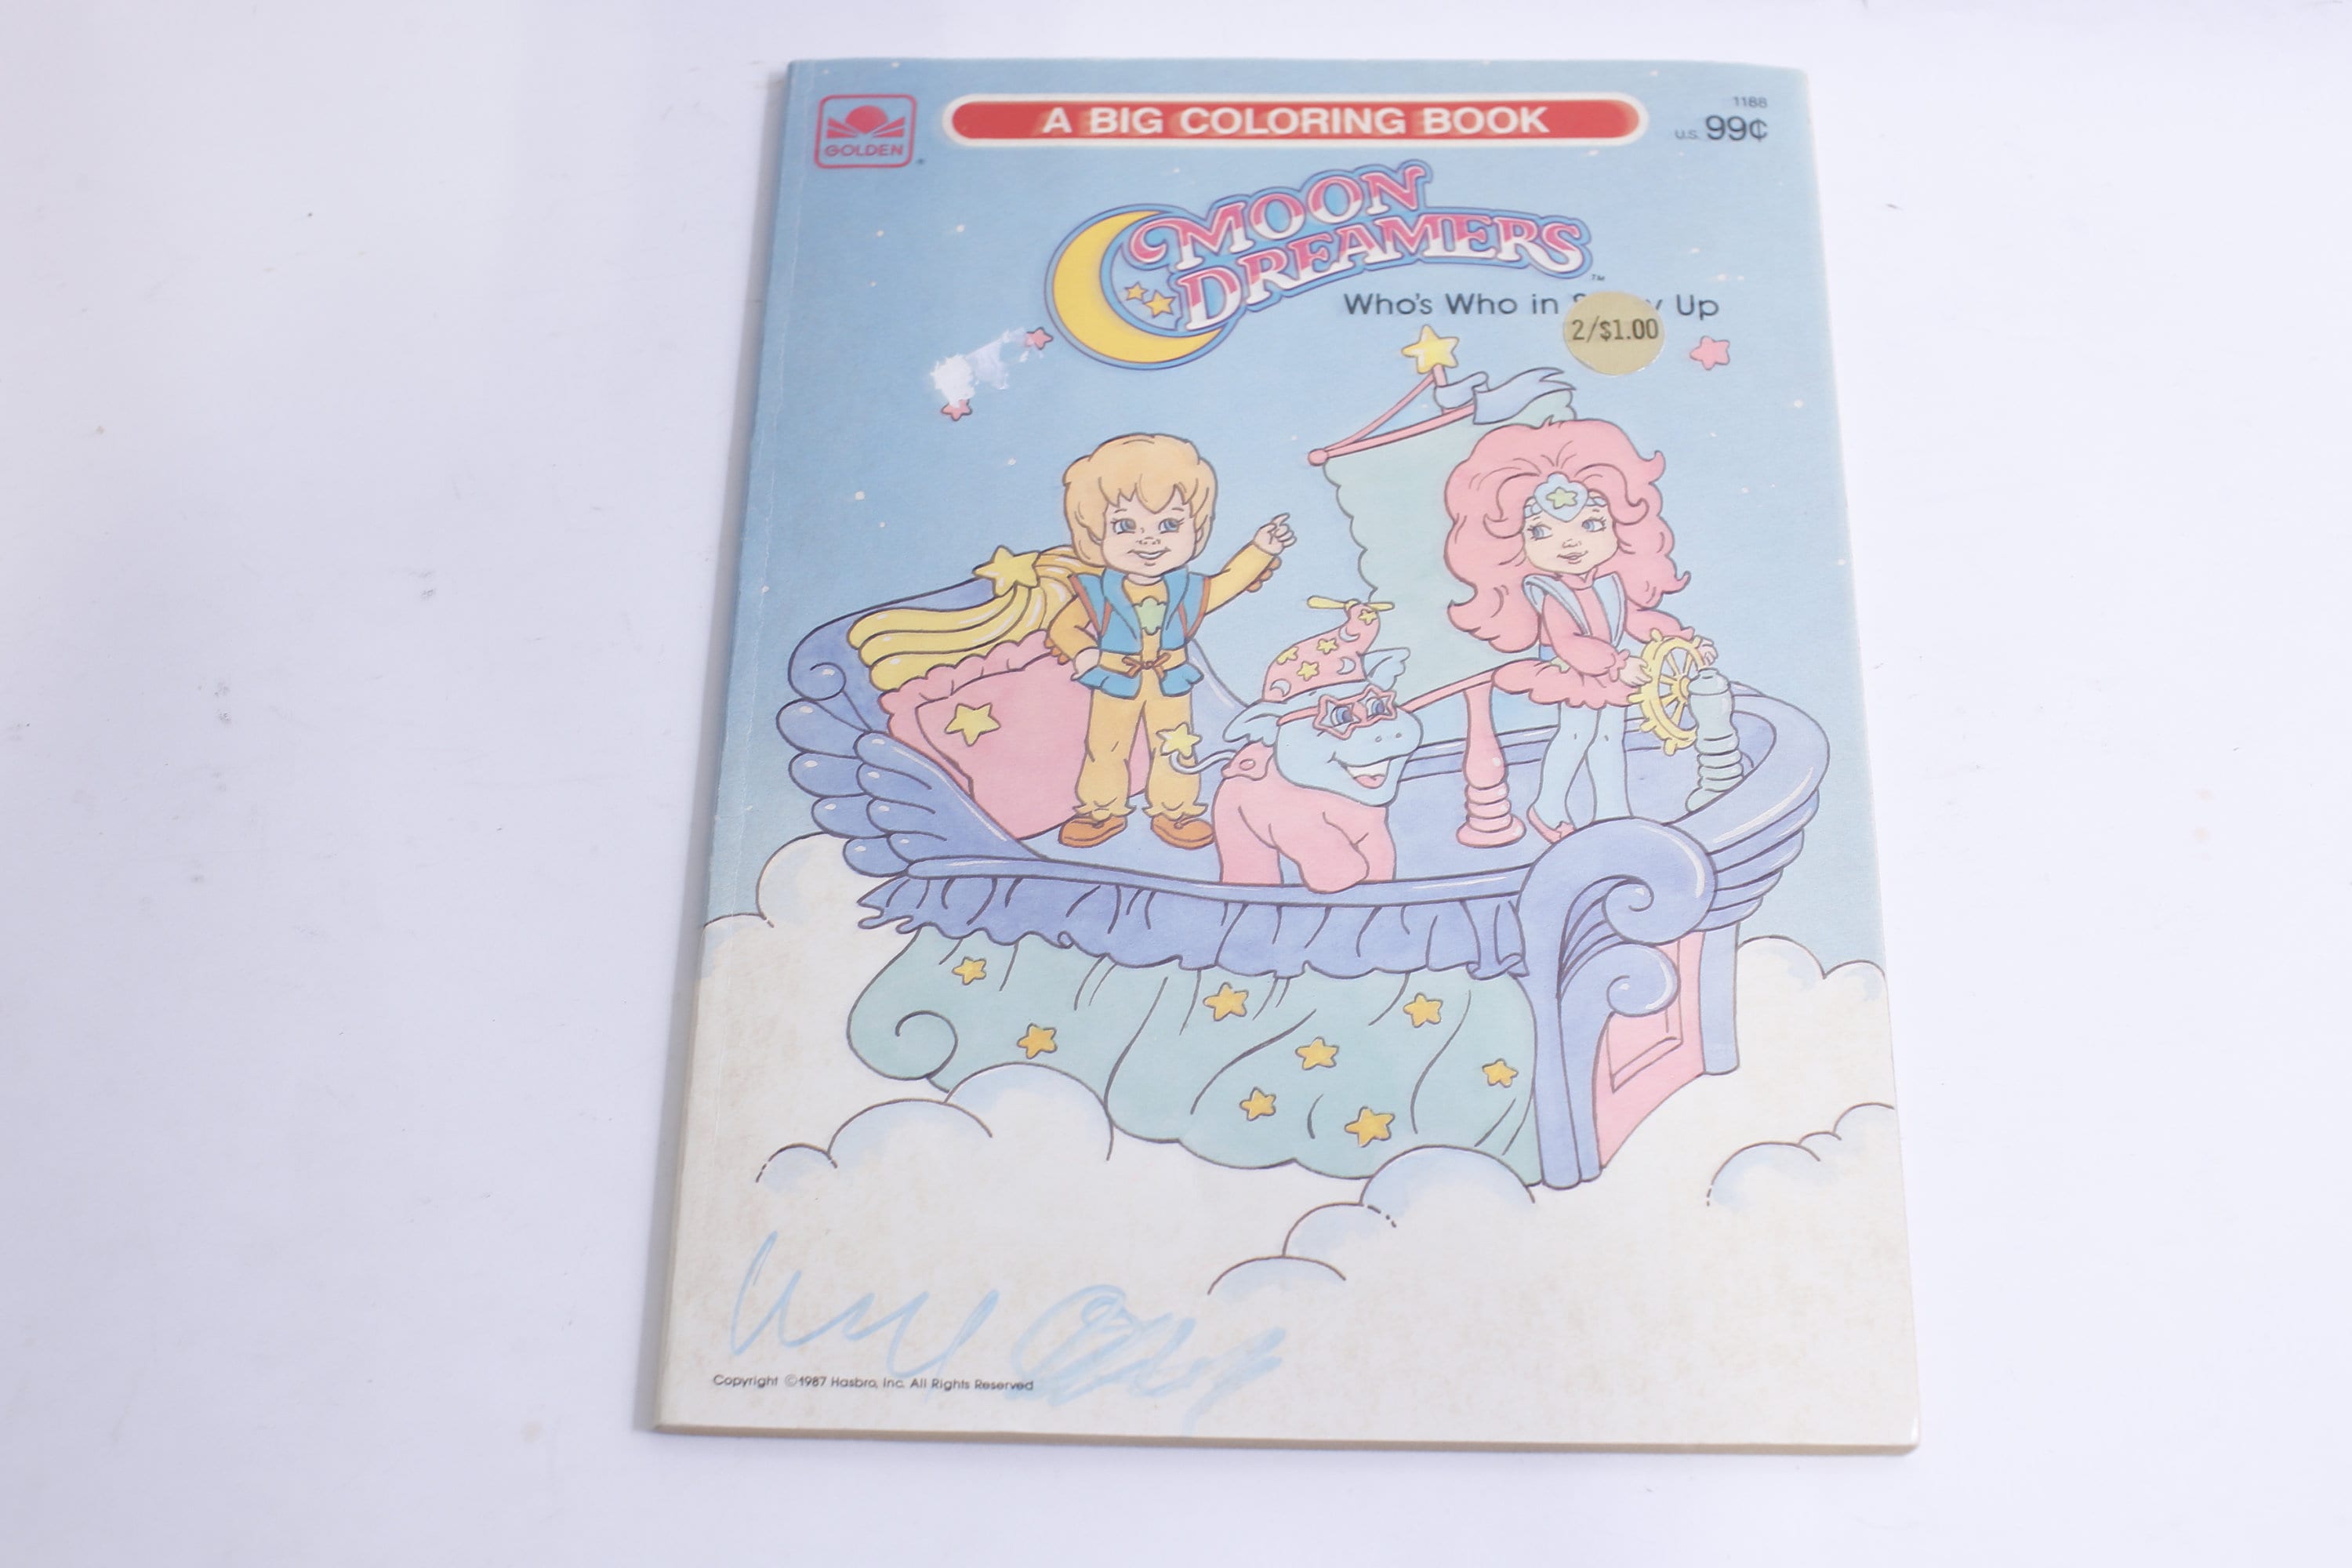 Moon Dreamers, A Big Coloring Book, Golden, 1987, Hasbro, Paperback,  Imagination, Creativity, Adventure, Few Pages Colored, 230215-DIS 68 